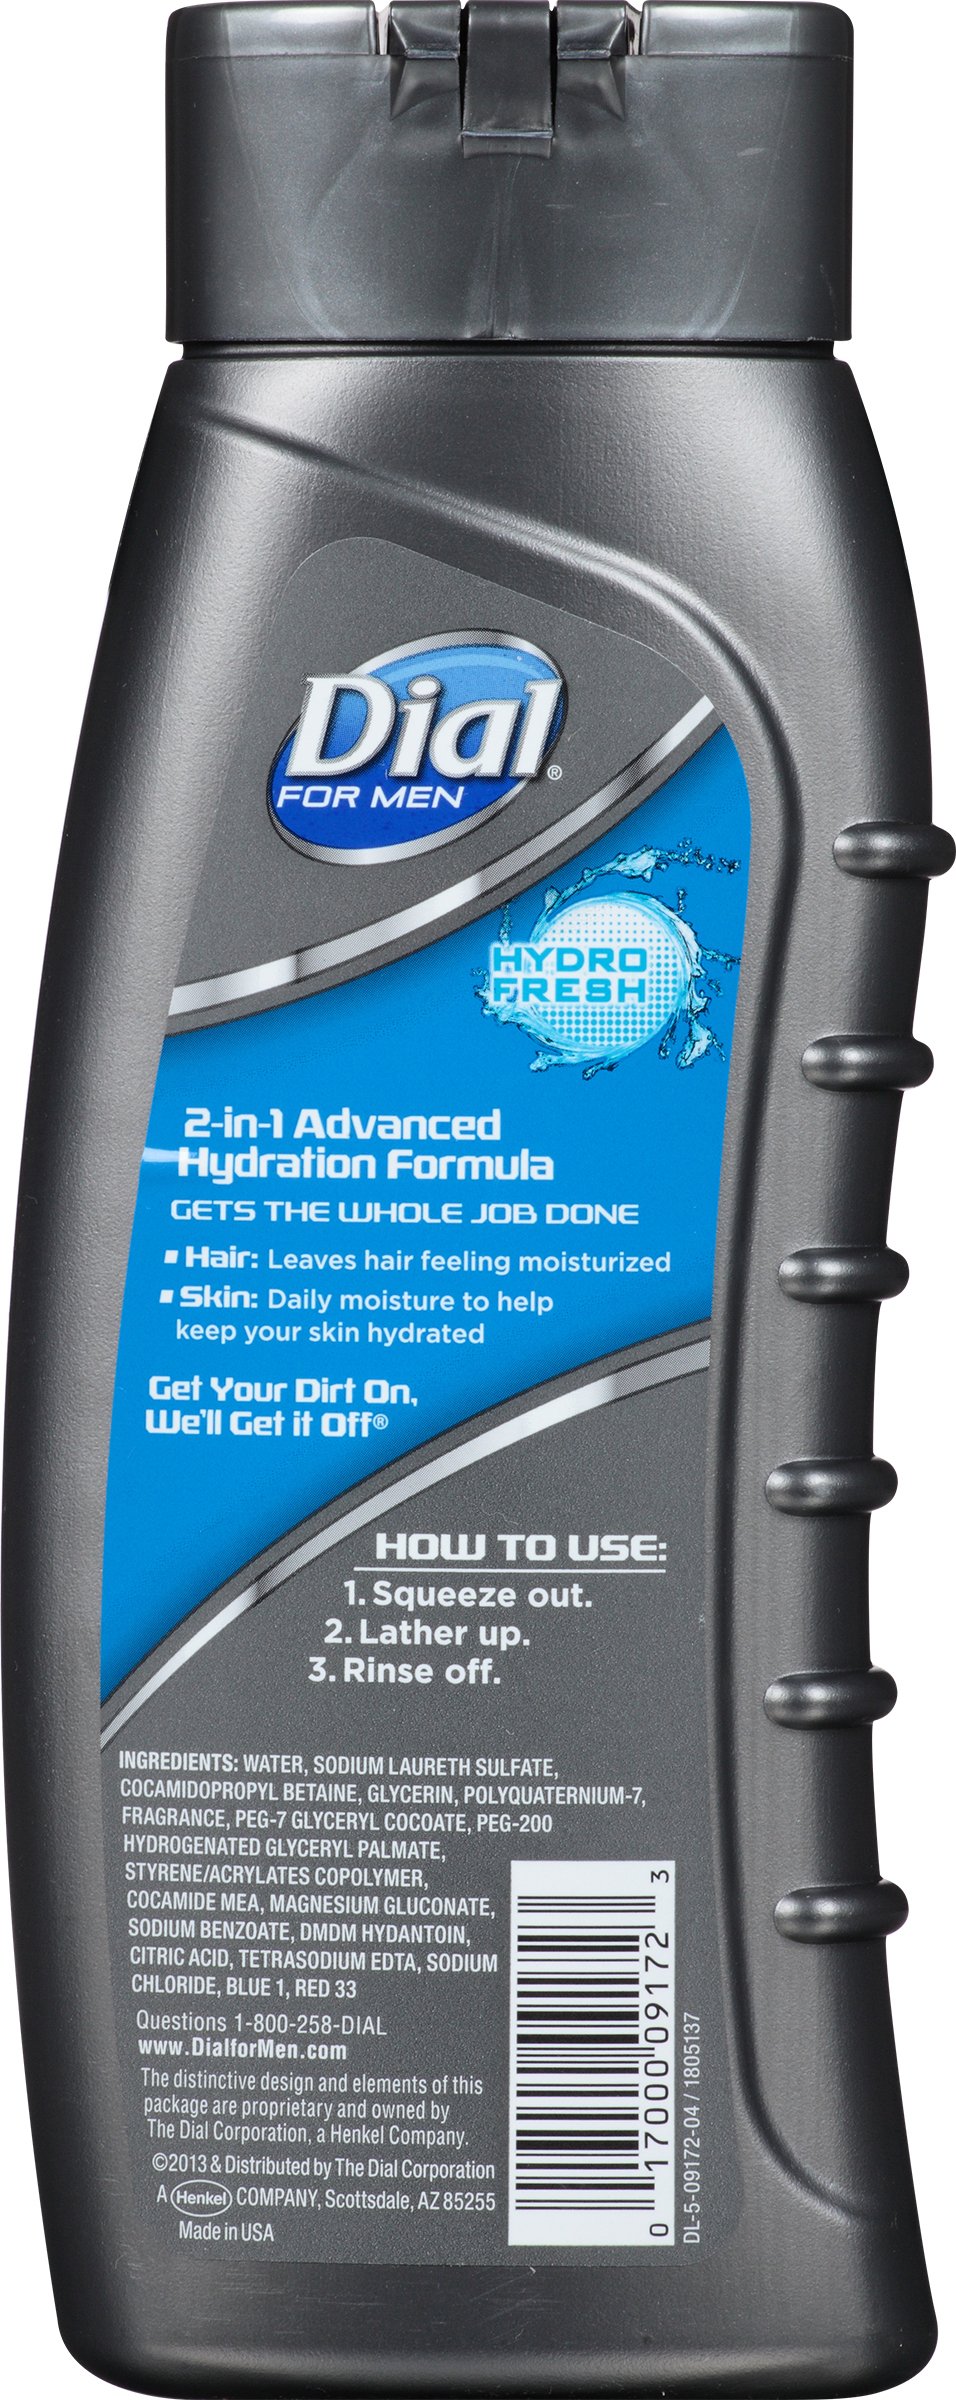 Dial For Men Hair and Body Wash, Hydro Fresh, 16 Fluid Ounce